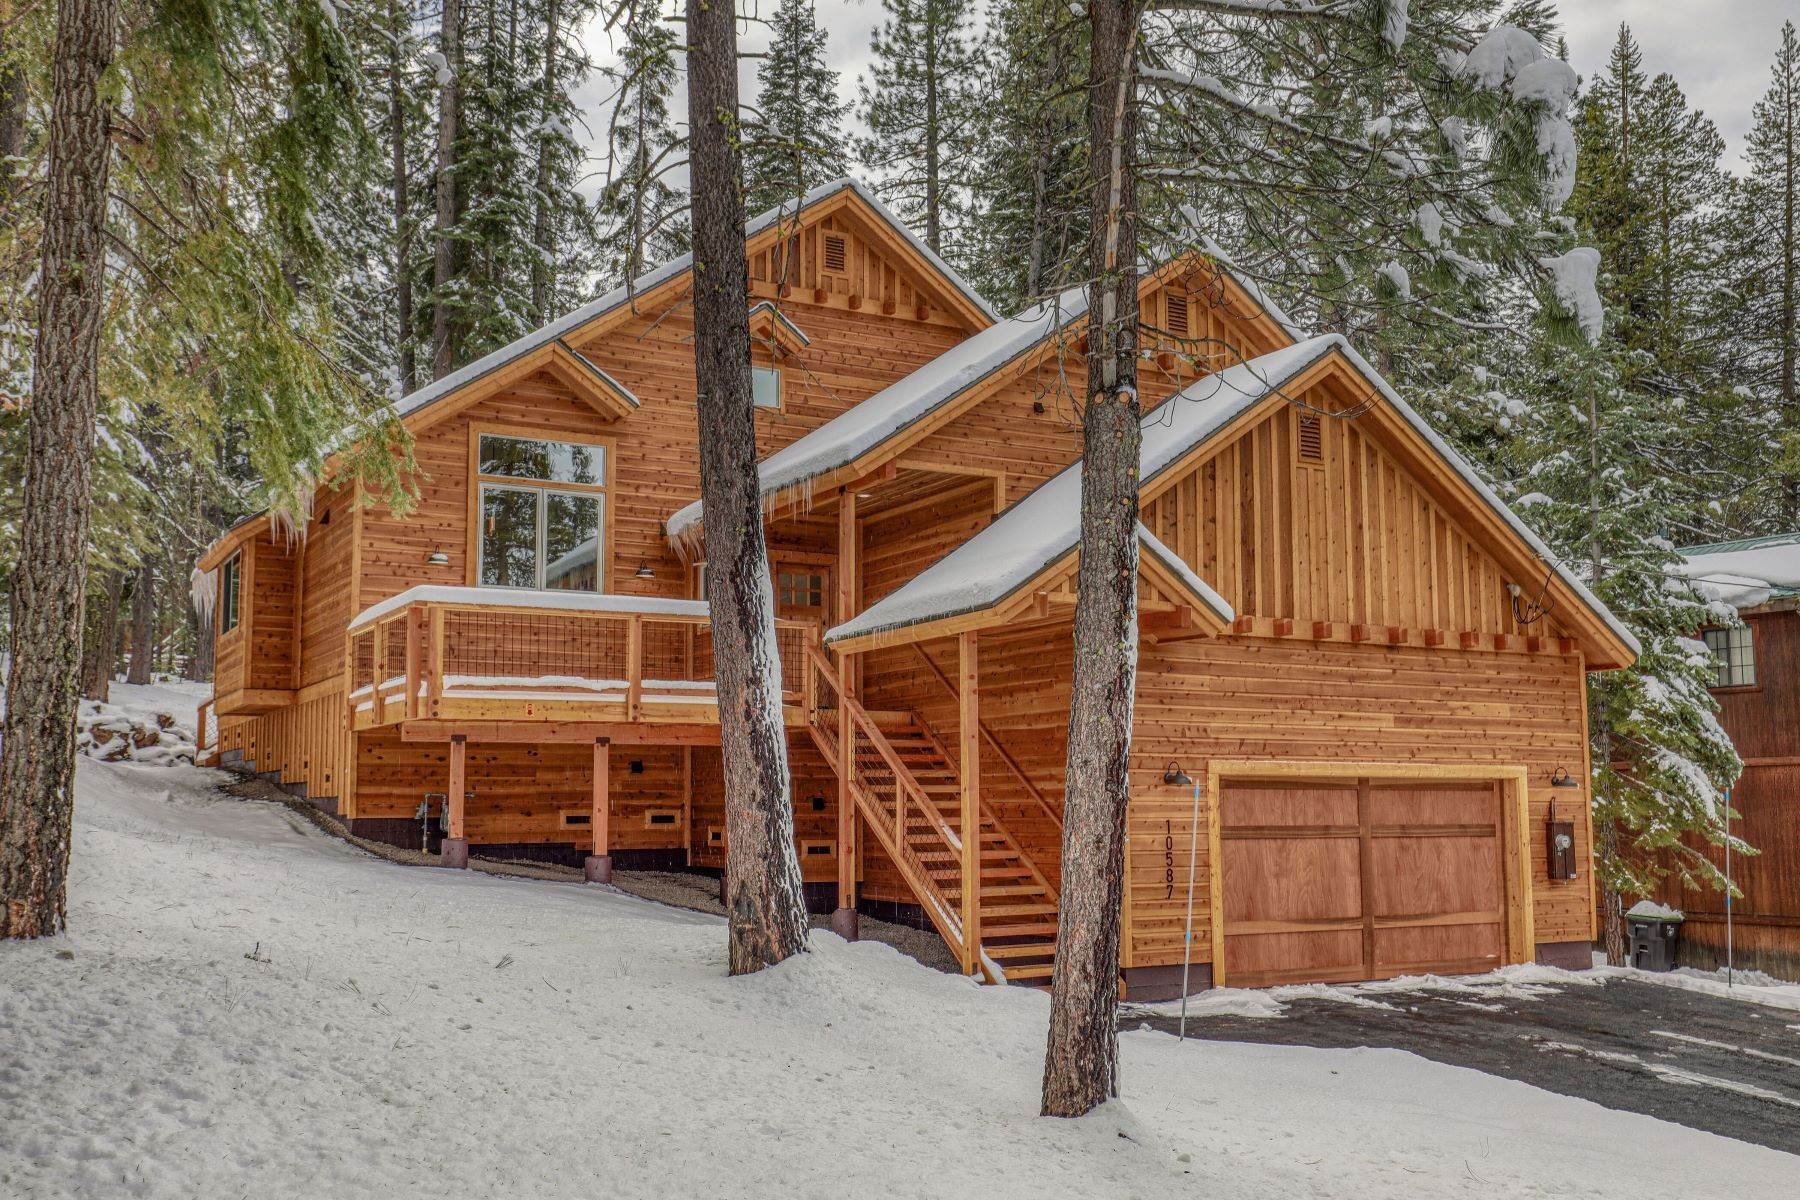 Single Family Homes for Active at New Construction in Tahoe Donner 10587 Mougle Lane Truckee, California 96161 United States